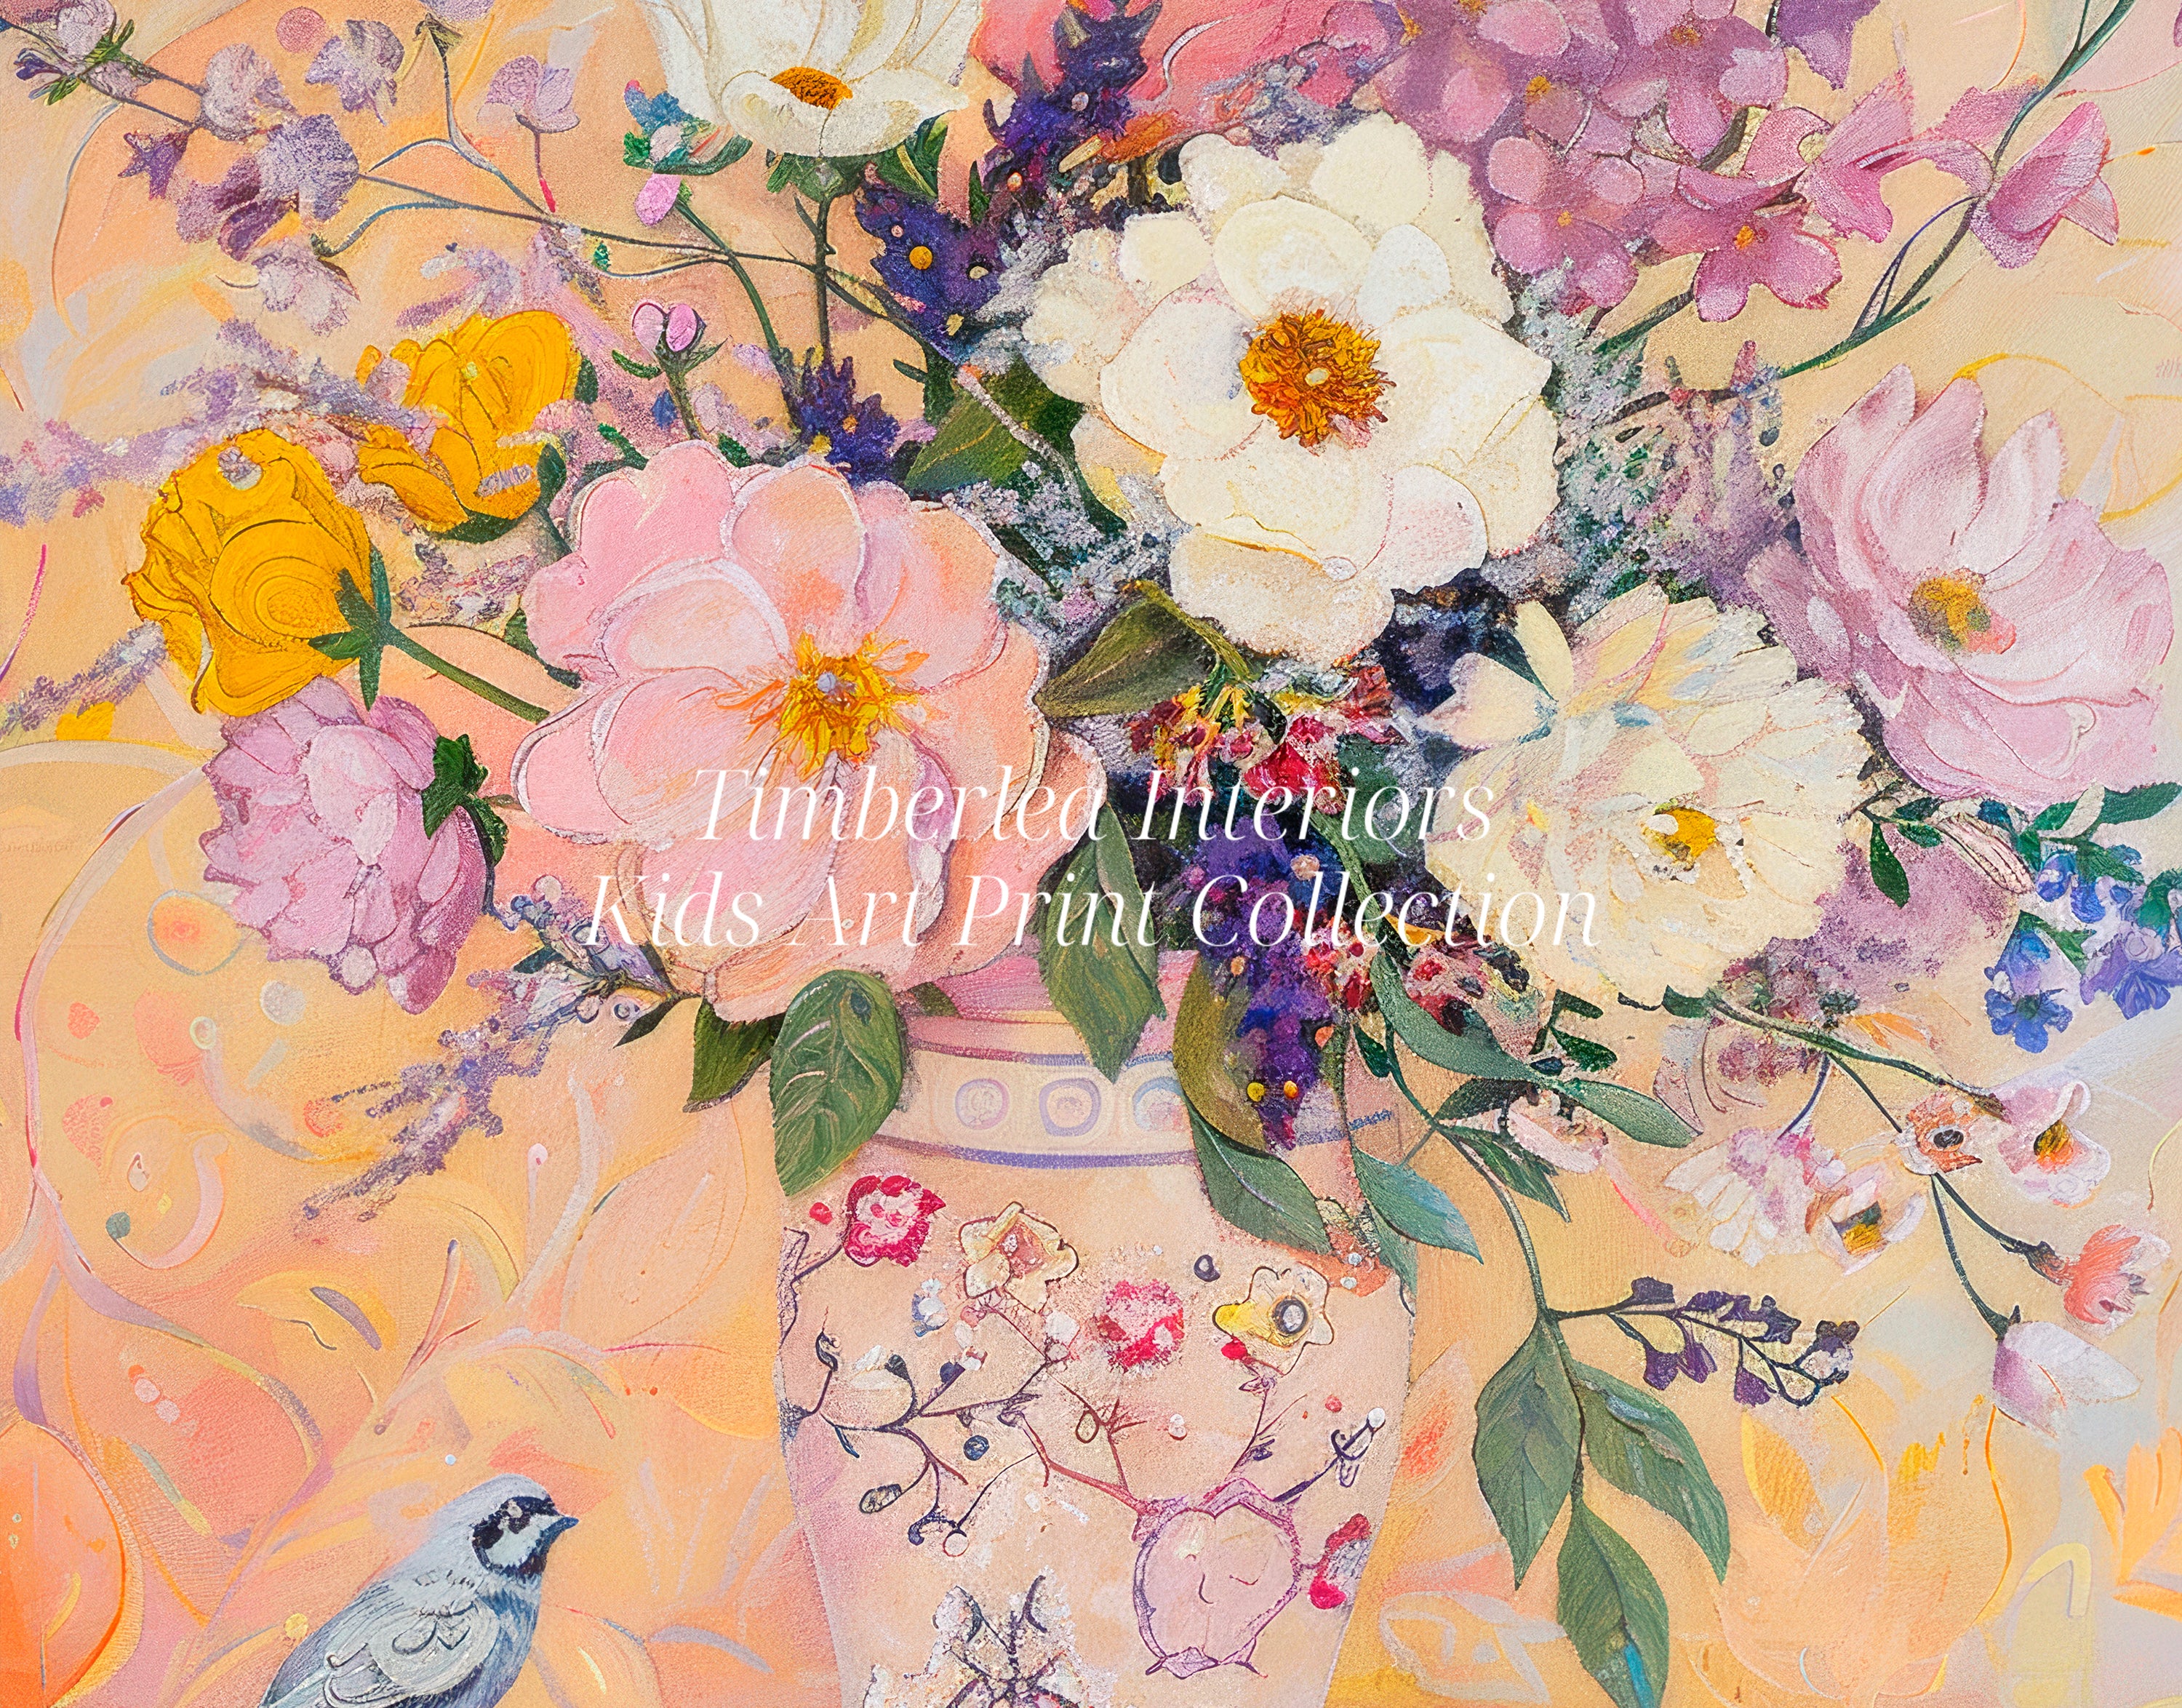 Close-up view of the Blooming Melody Art Print showcasing a detailed bouquet of pink, yellow, and white flowers in a decorative vase with a charming bird and butterflies.